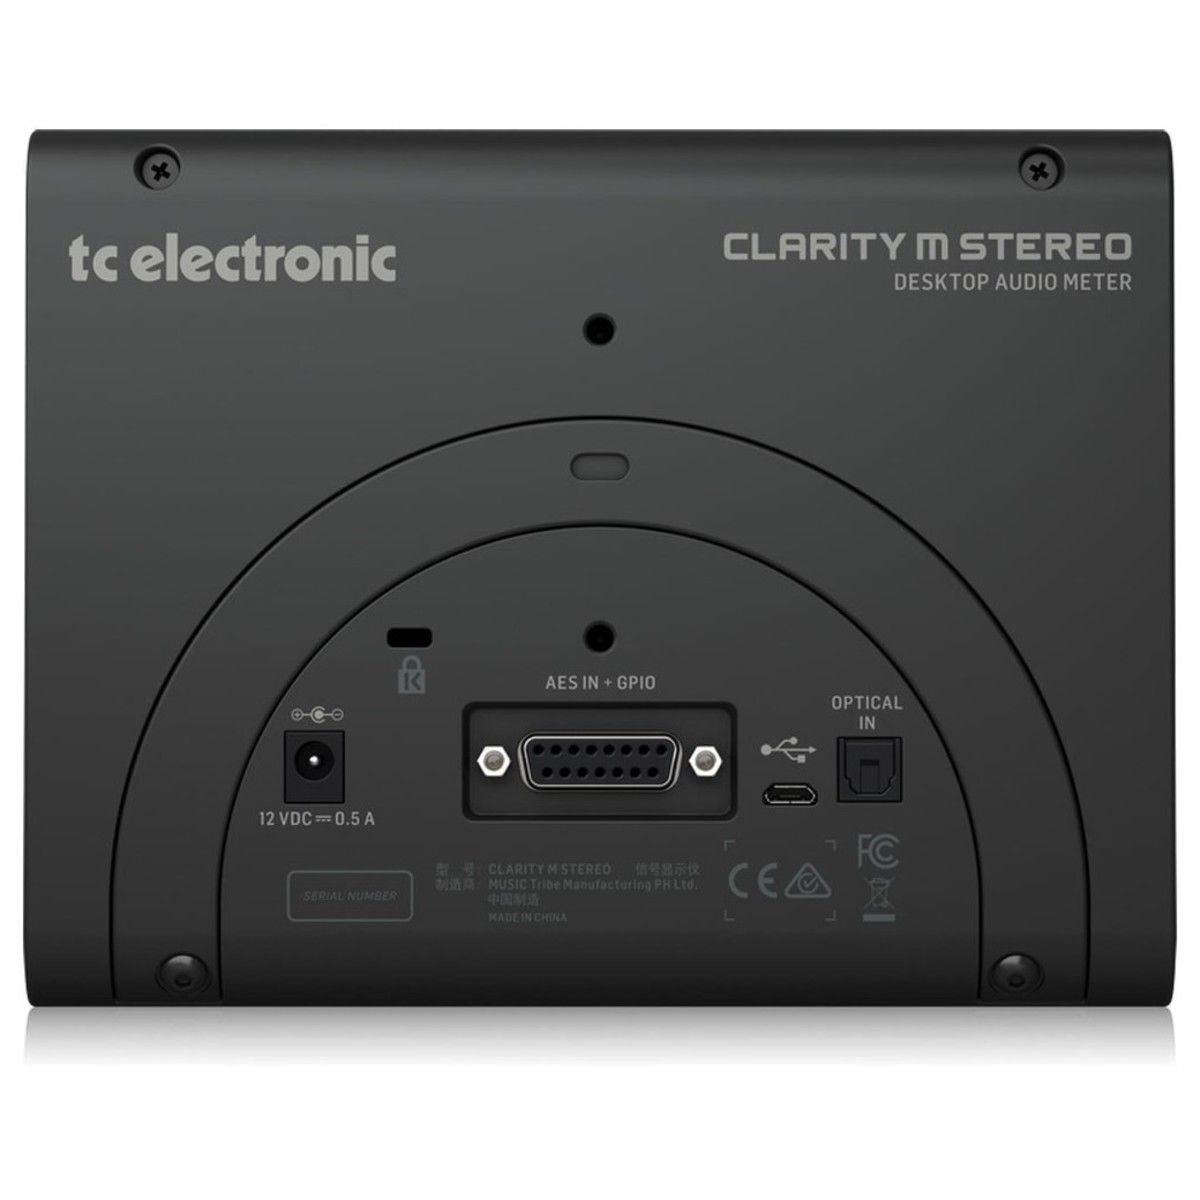    TC ELECTRONIC CLARITY M STEREO